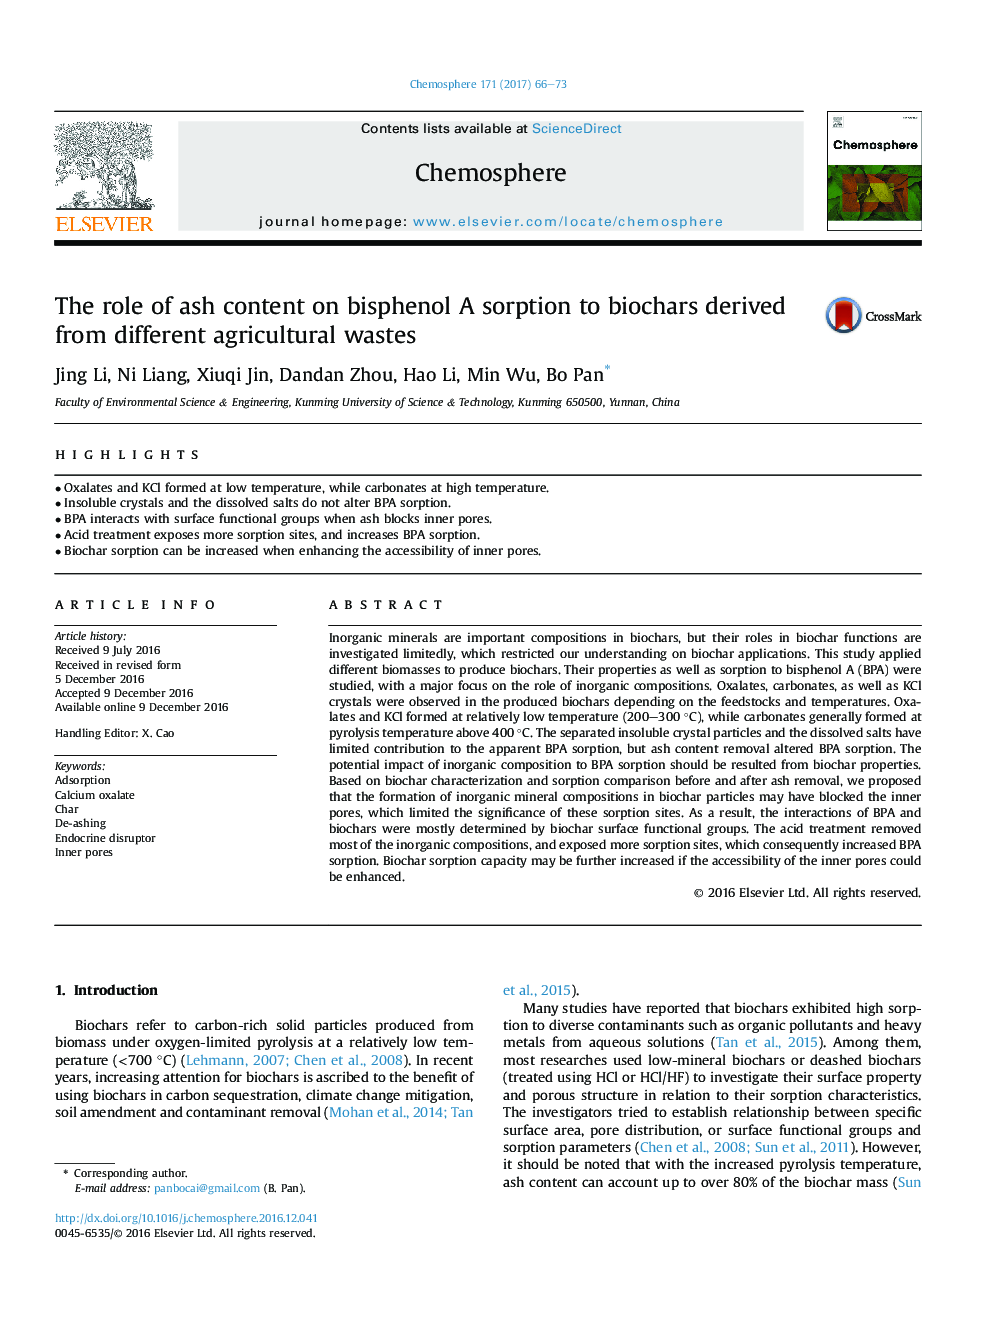 The role of ash content on bisphenol A sorption to biochars derived from different agricultural wastes